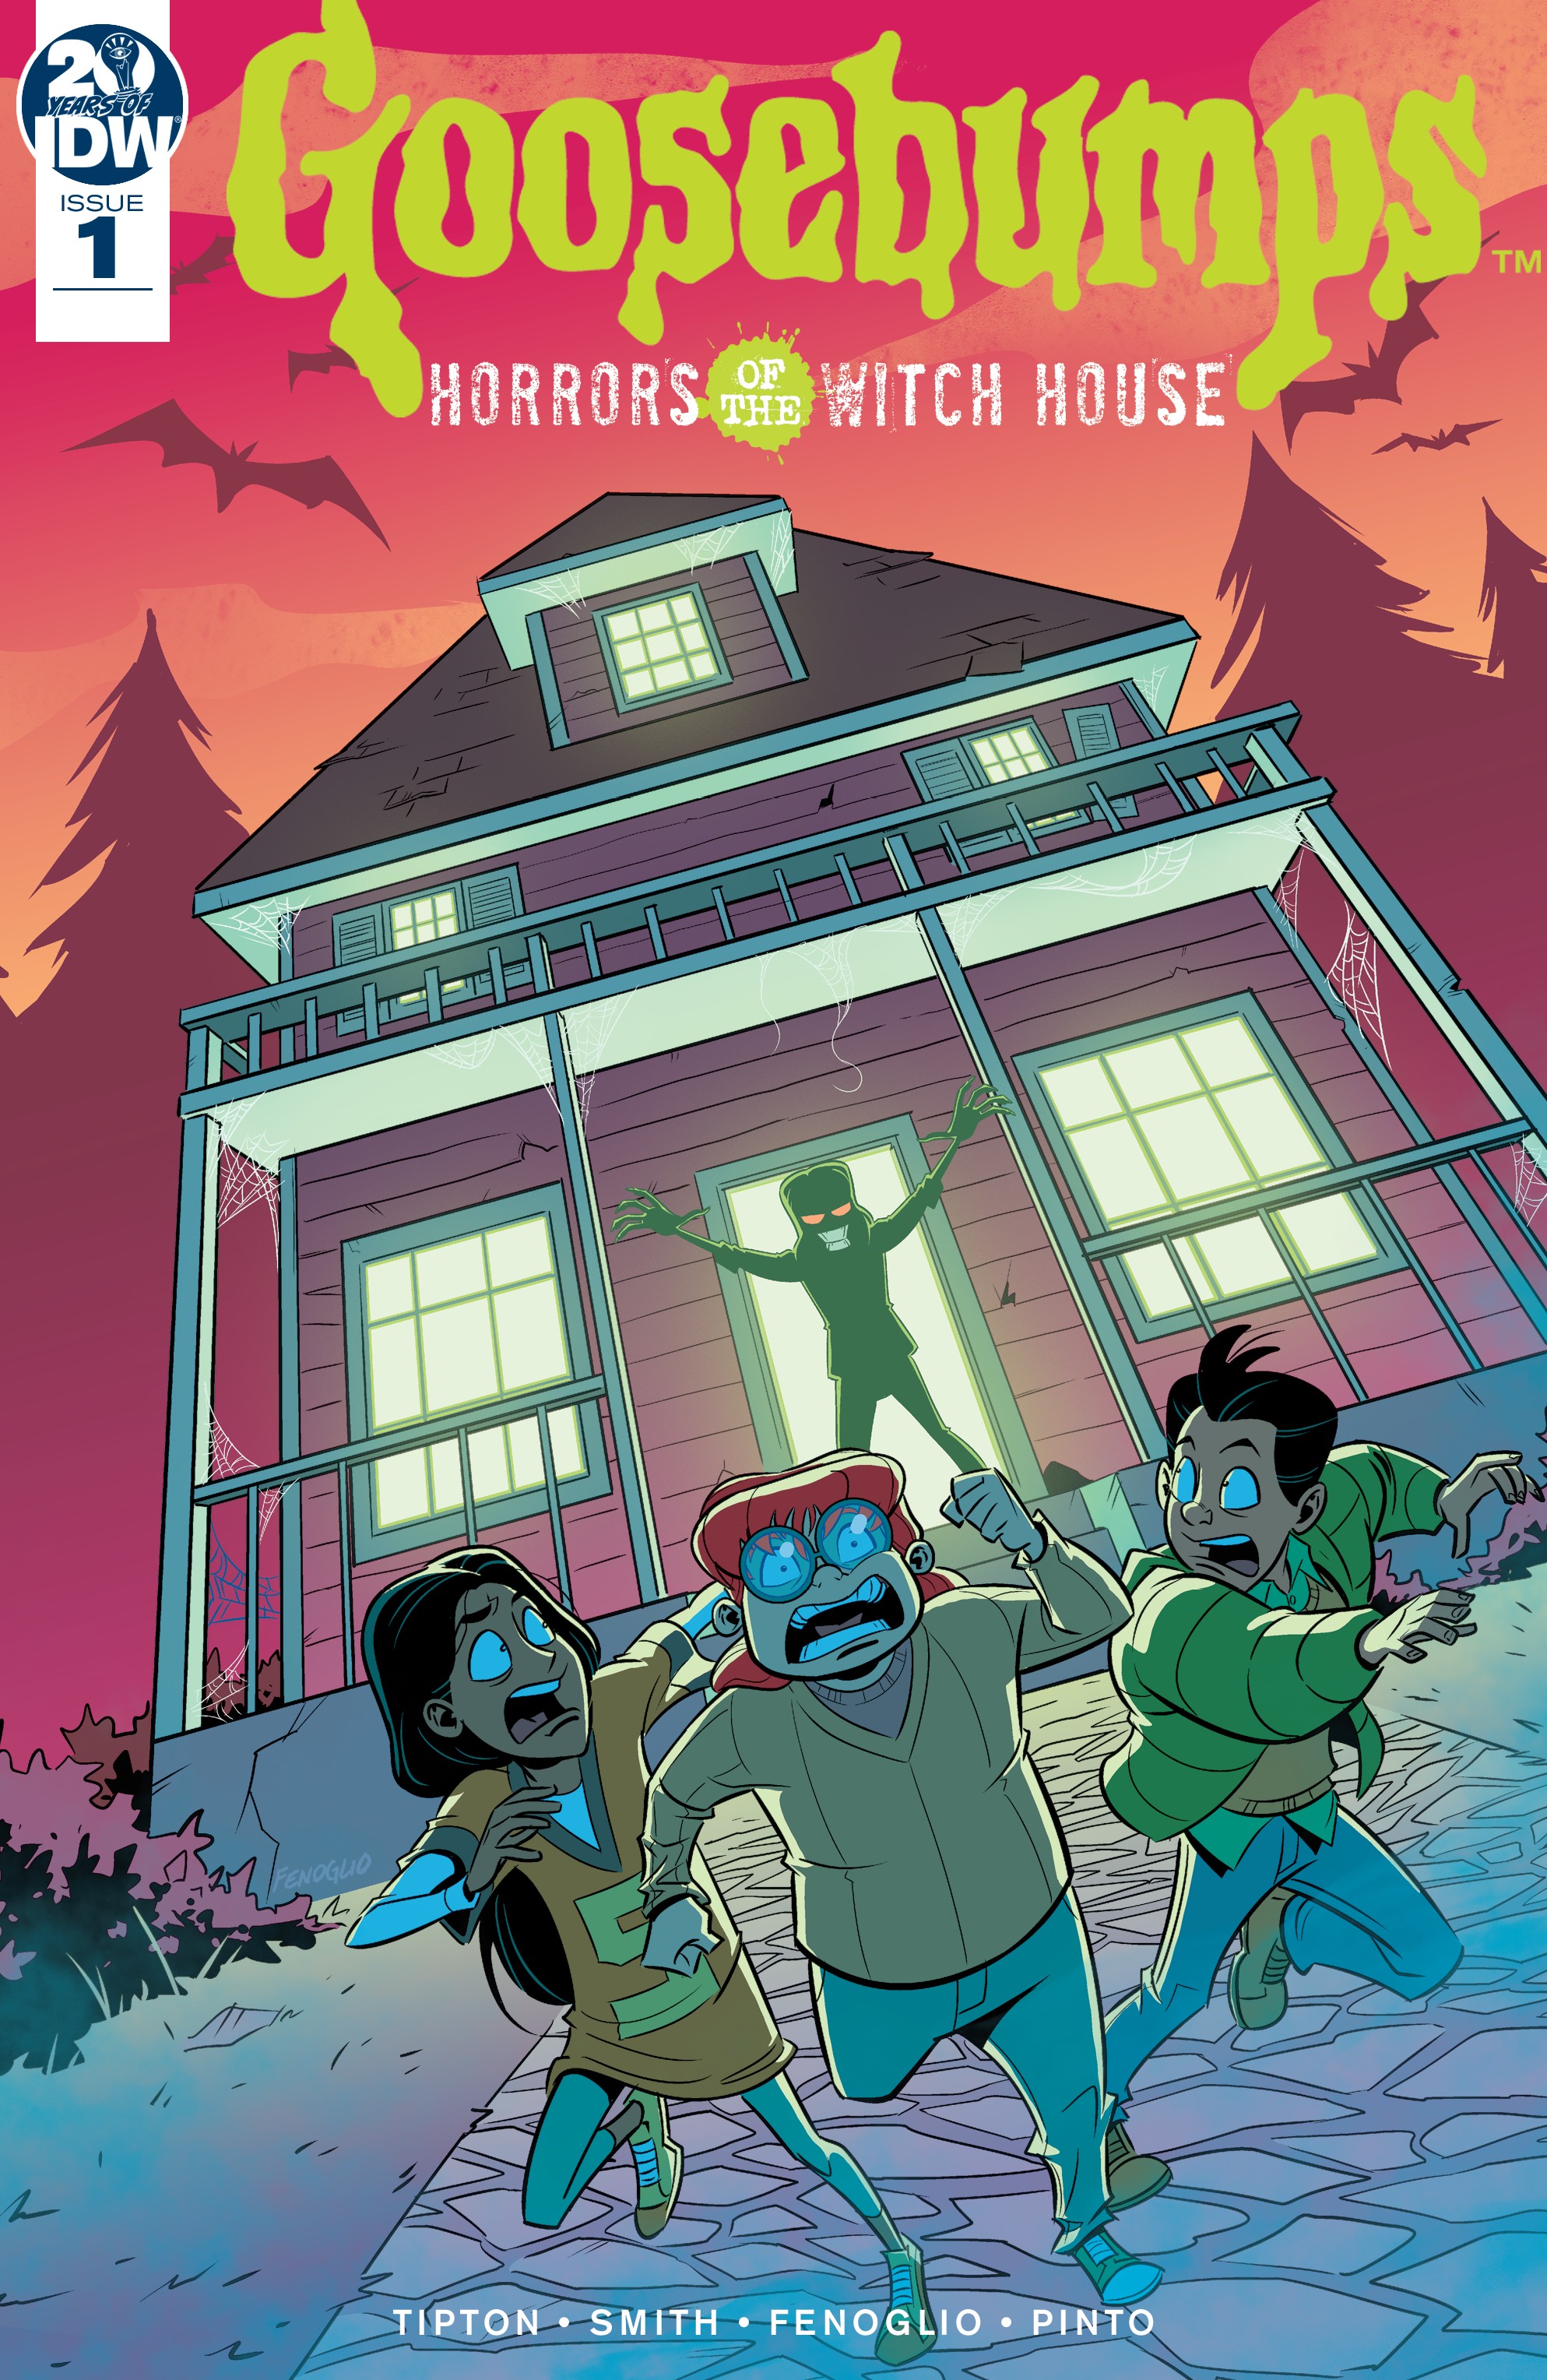 Read online Goosebumps: Horrors of the Witch House comic -  Issue #1 - 1